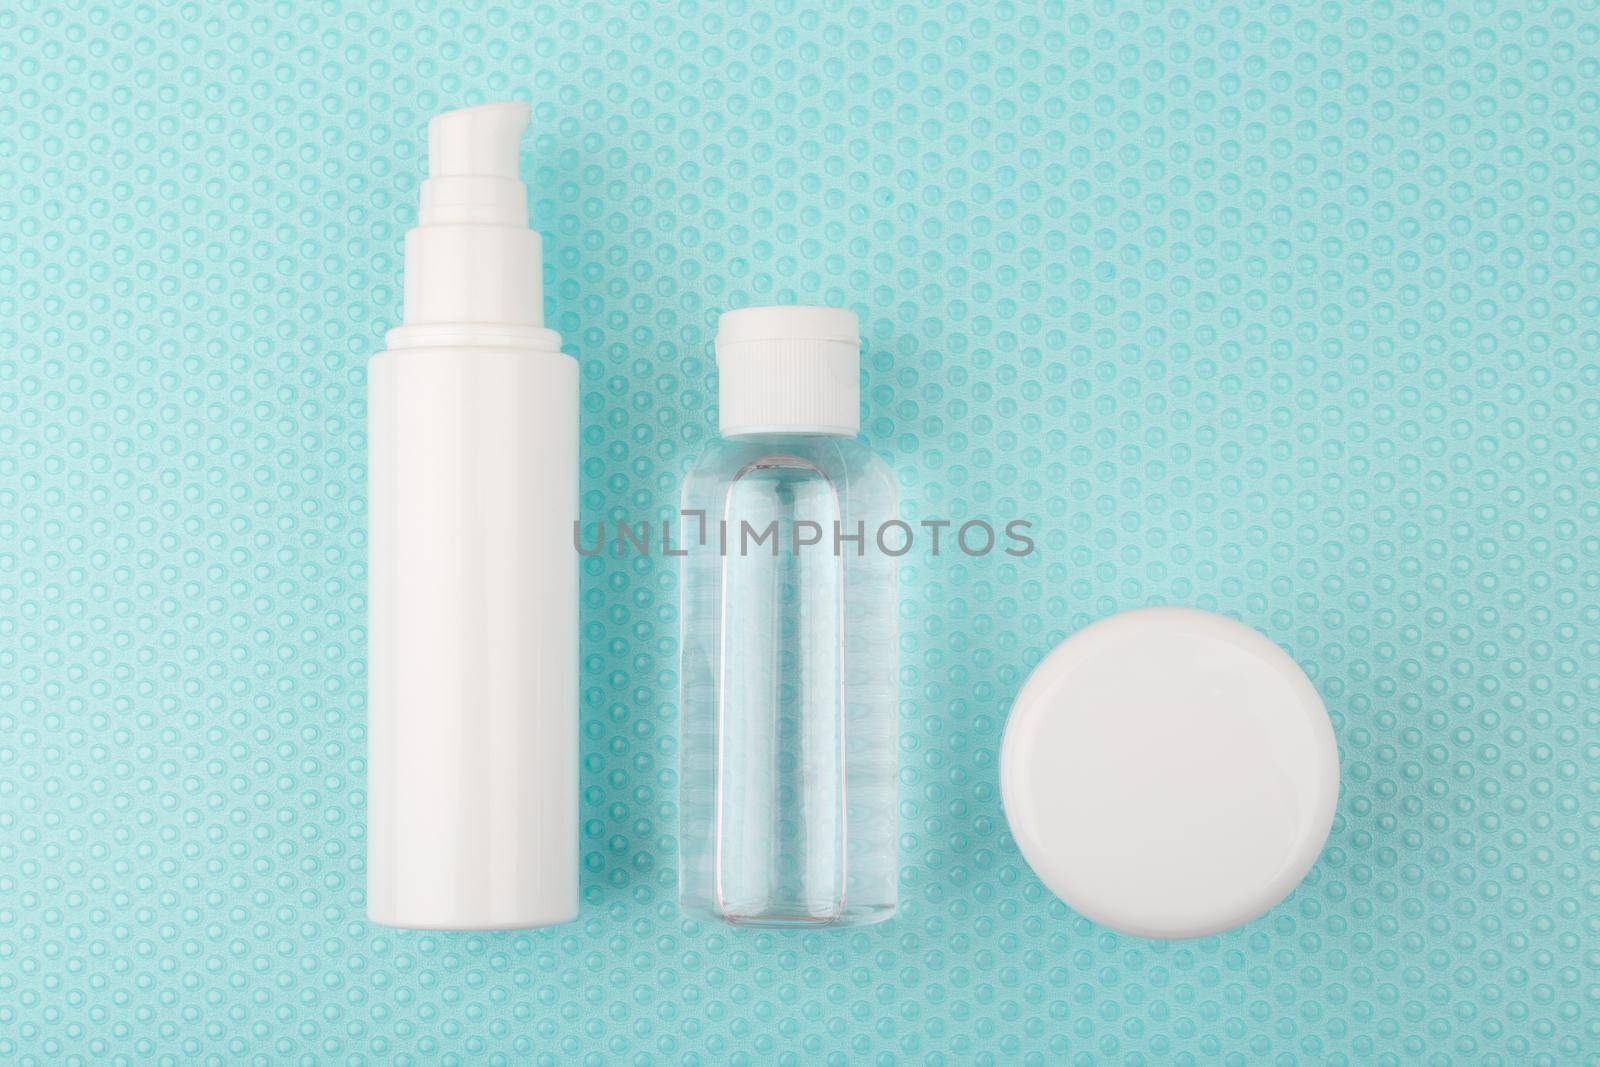 Toiletries on light blue background with bubbles. Moisturizing cream, exfoliating lotion and under eye cream set for daily skin care routine